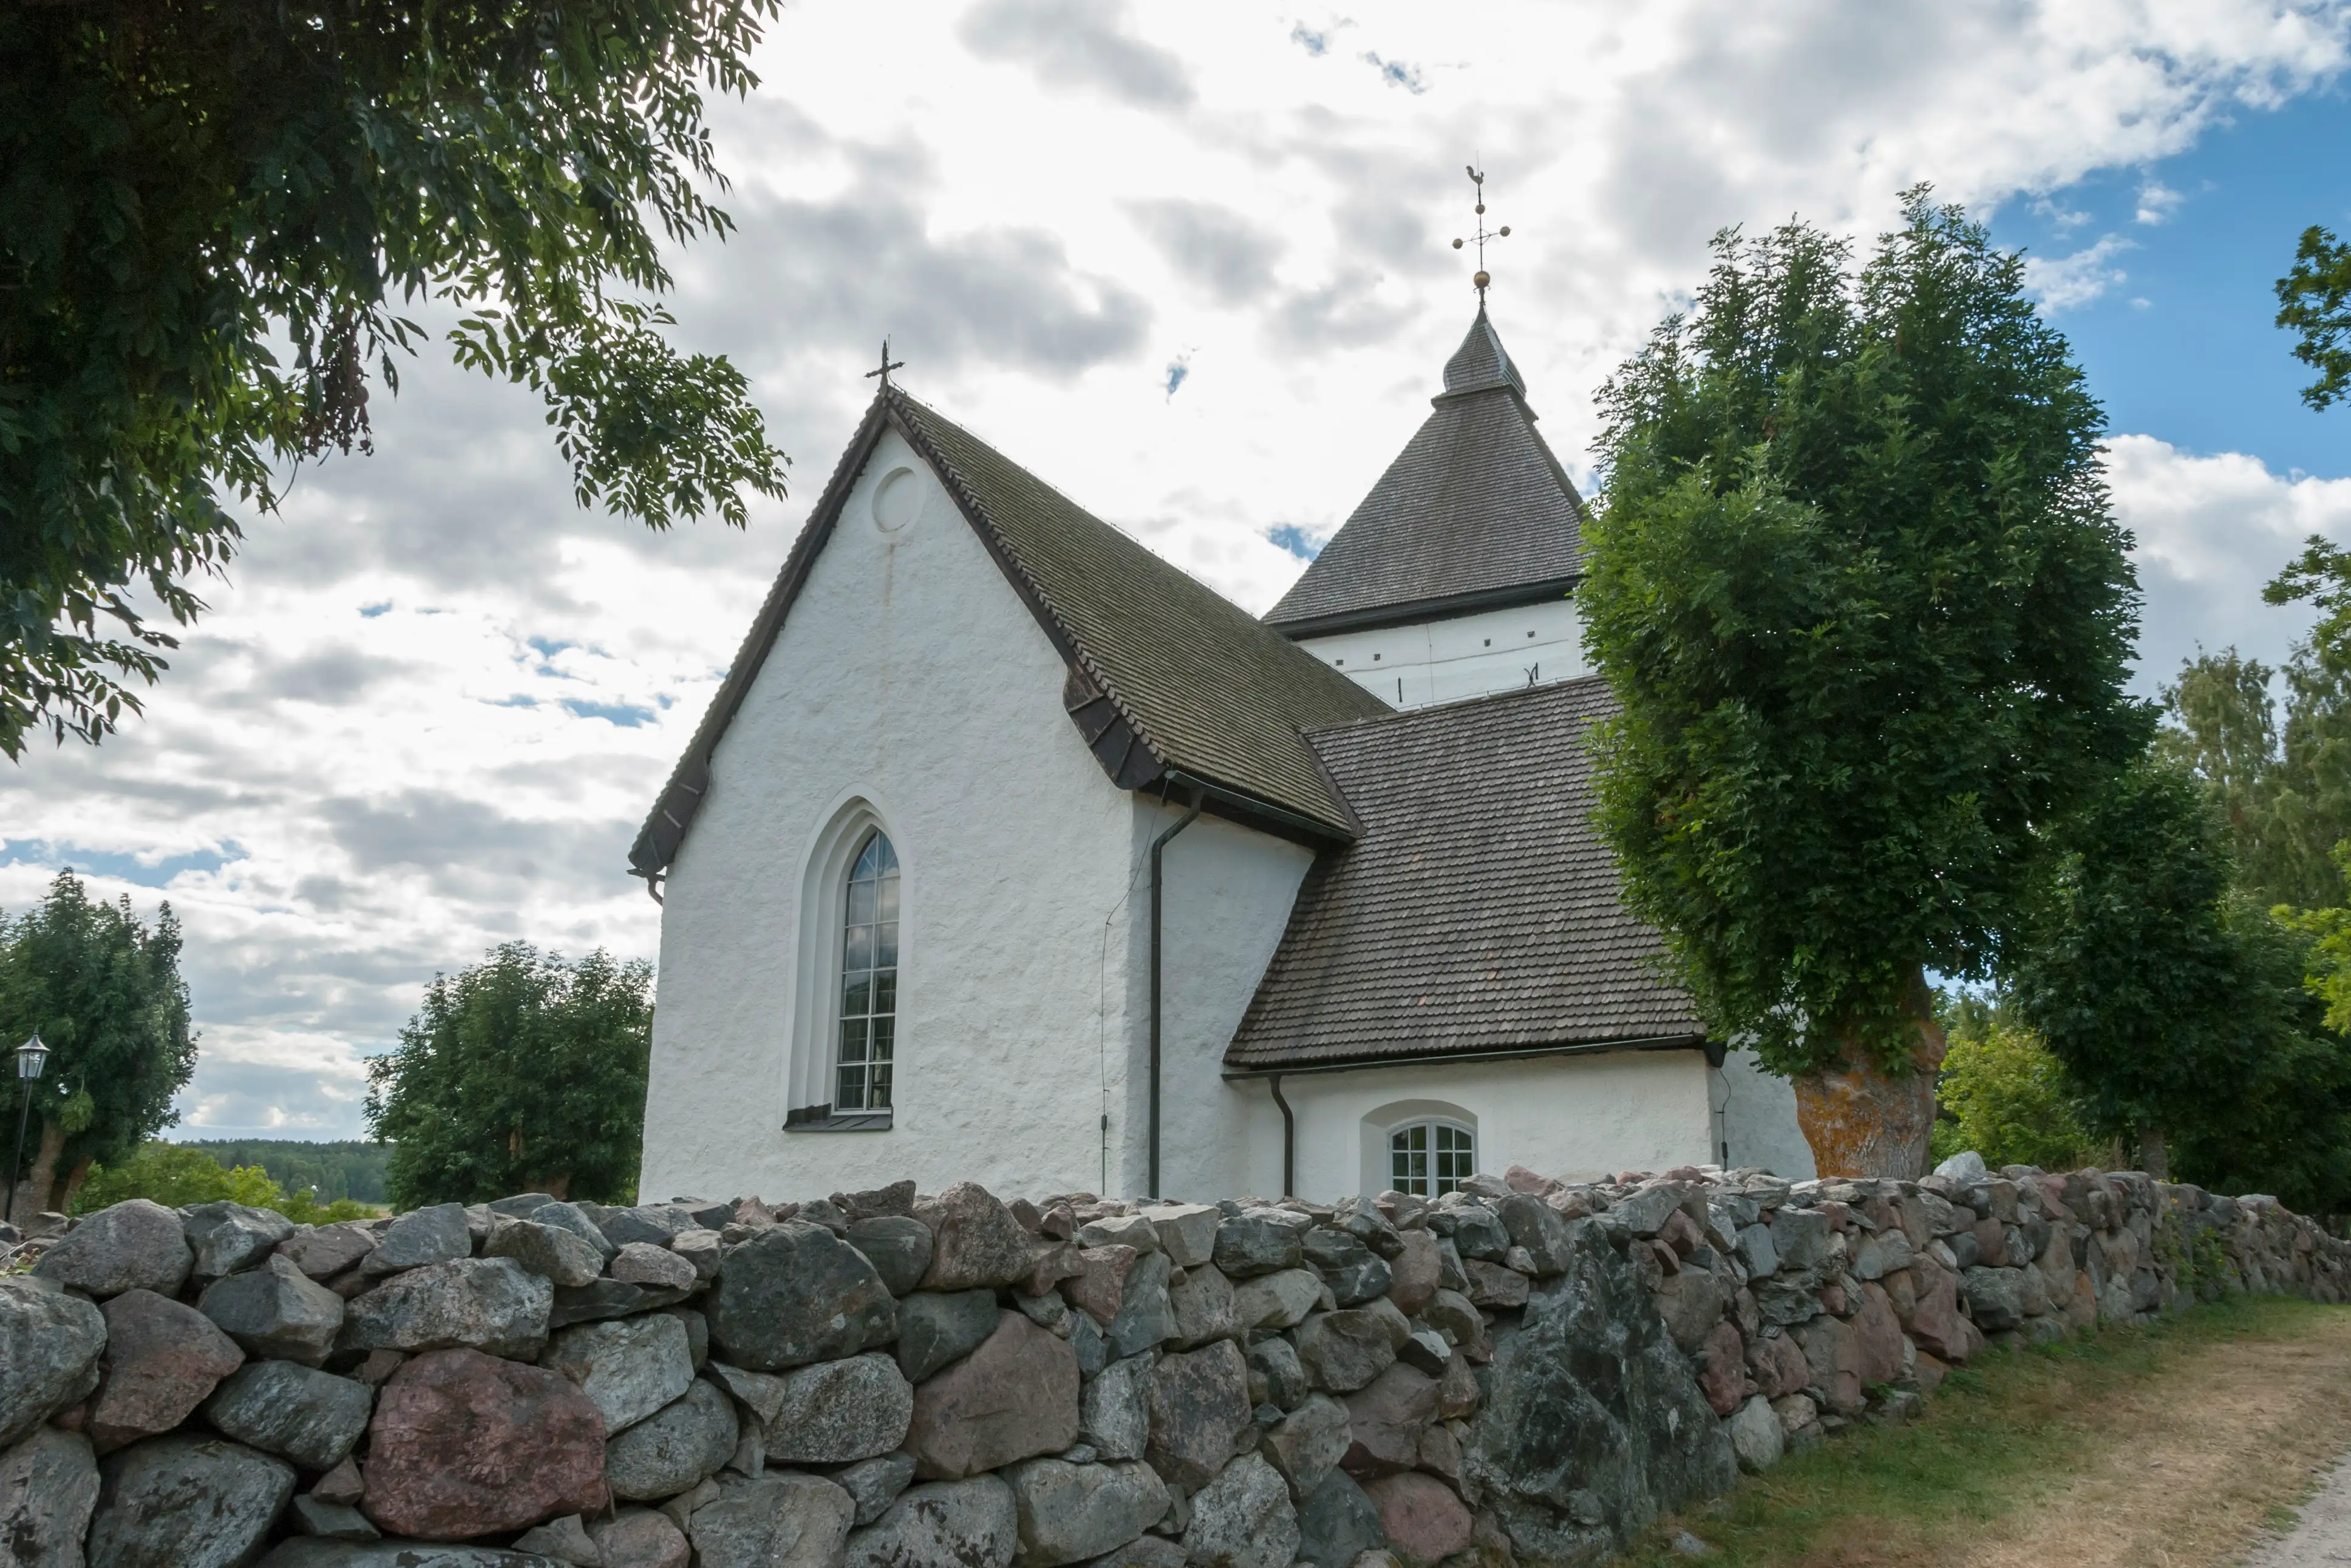  Old church in Hovgarden Sweden with rock wall in front.